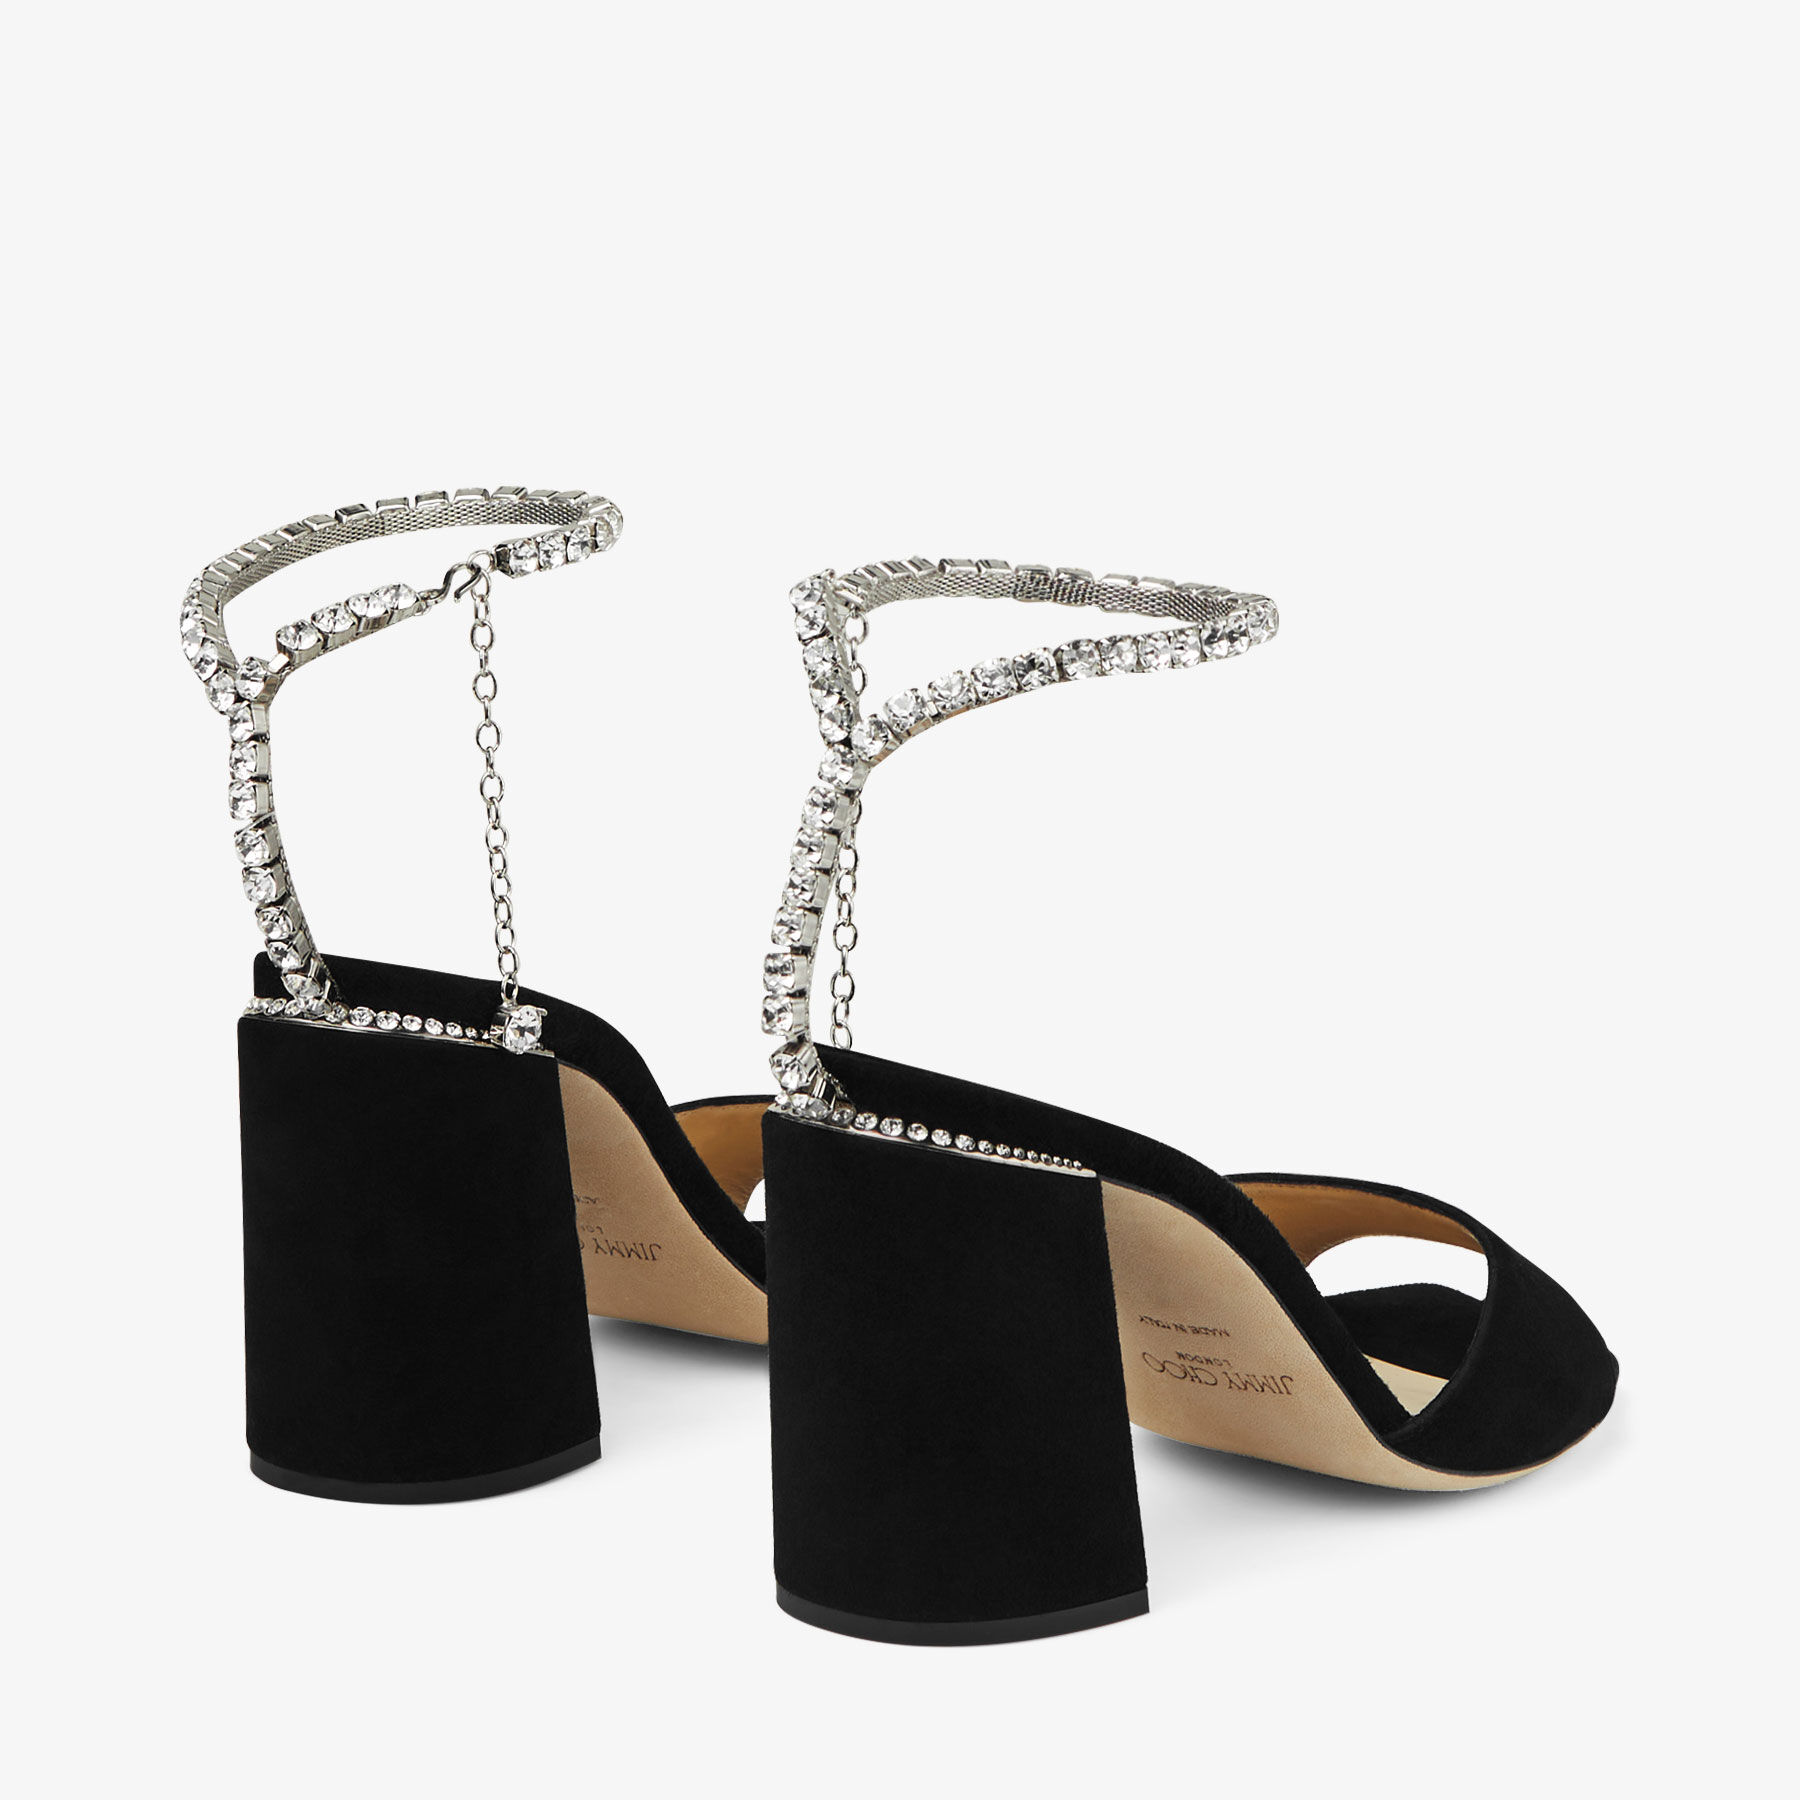 SAEDA SANDAL/BH 85, Black Suede Sandals with Swarovski Crystal Chain, New  Collection